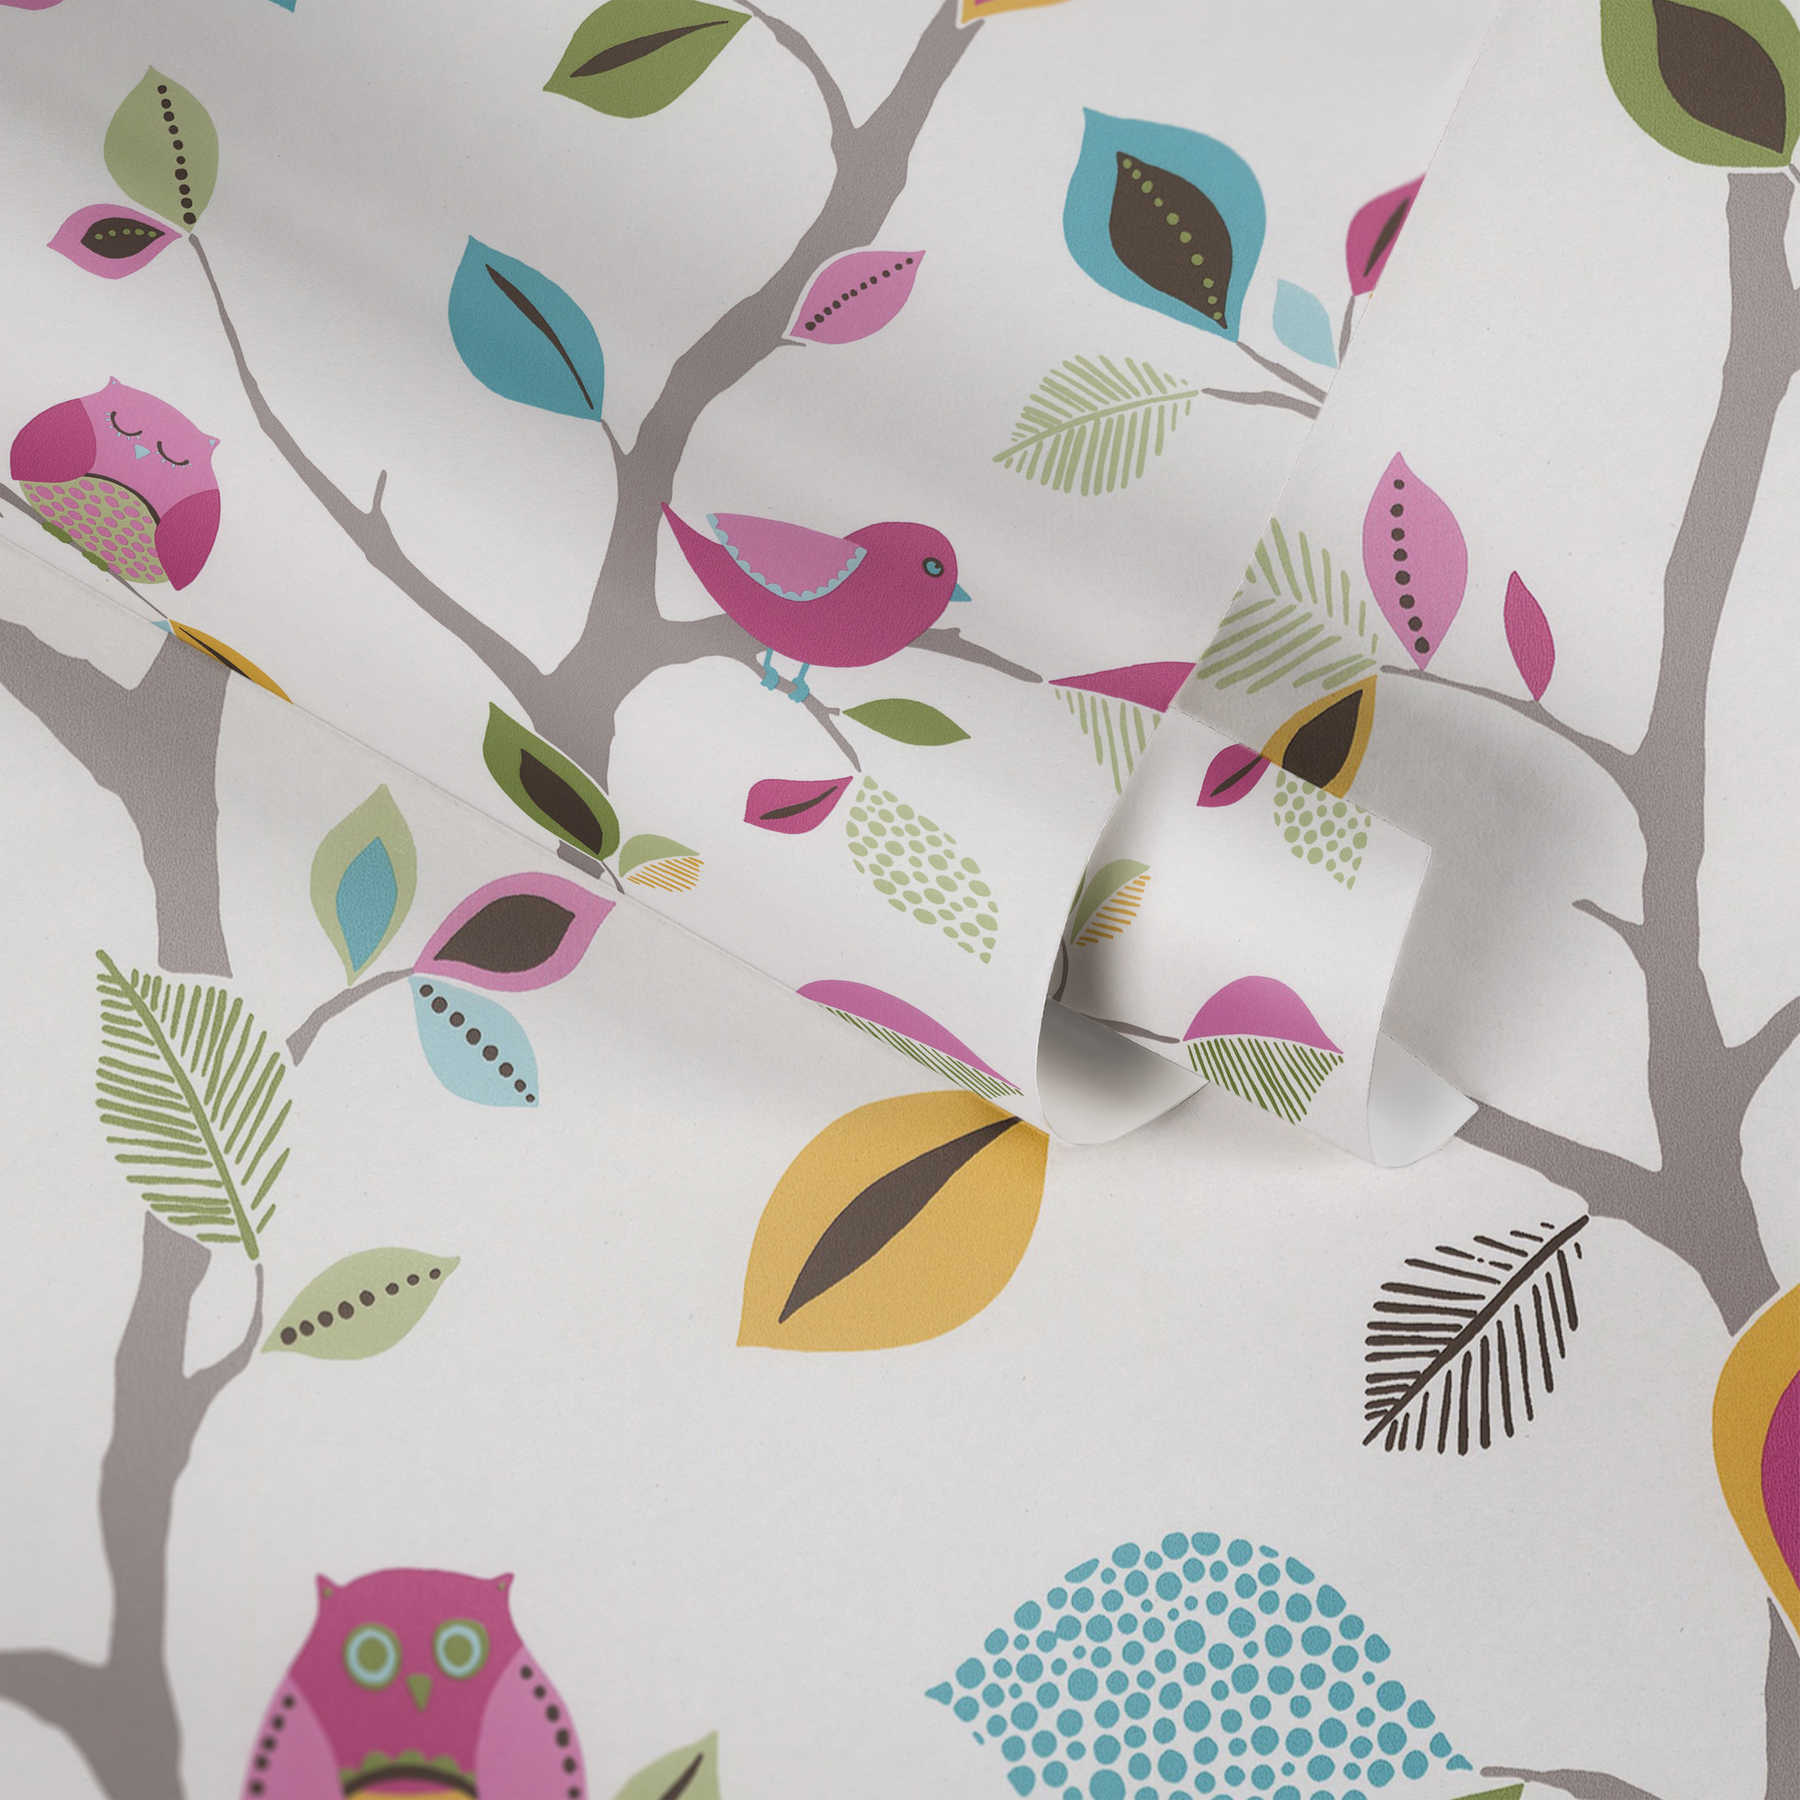             Nursery wallpaper paper with owls & birds - colourful, green
        